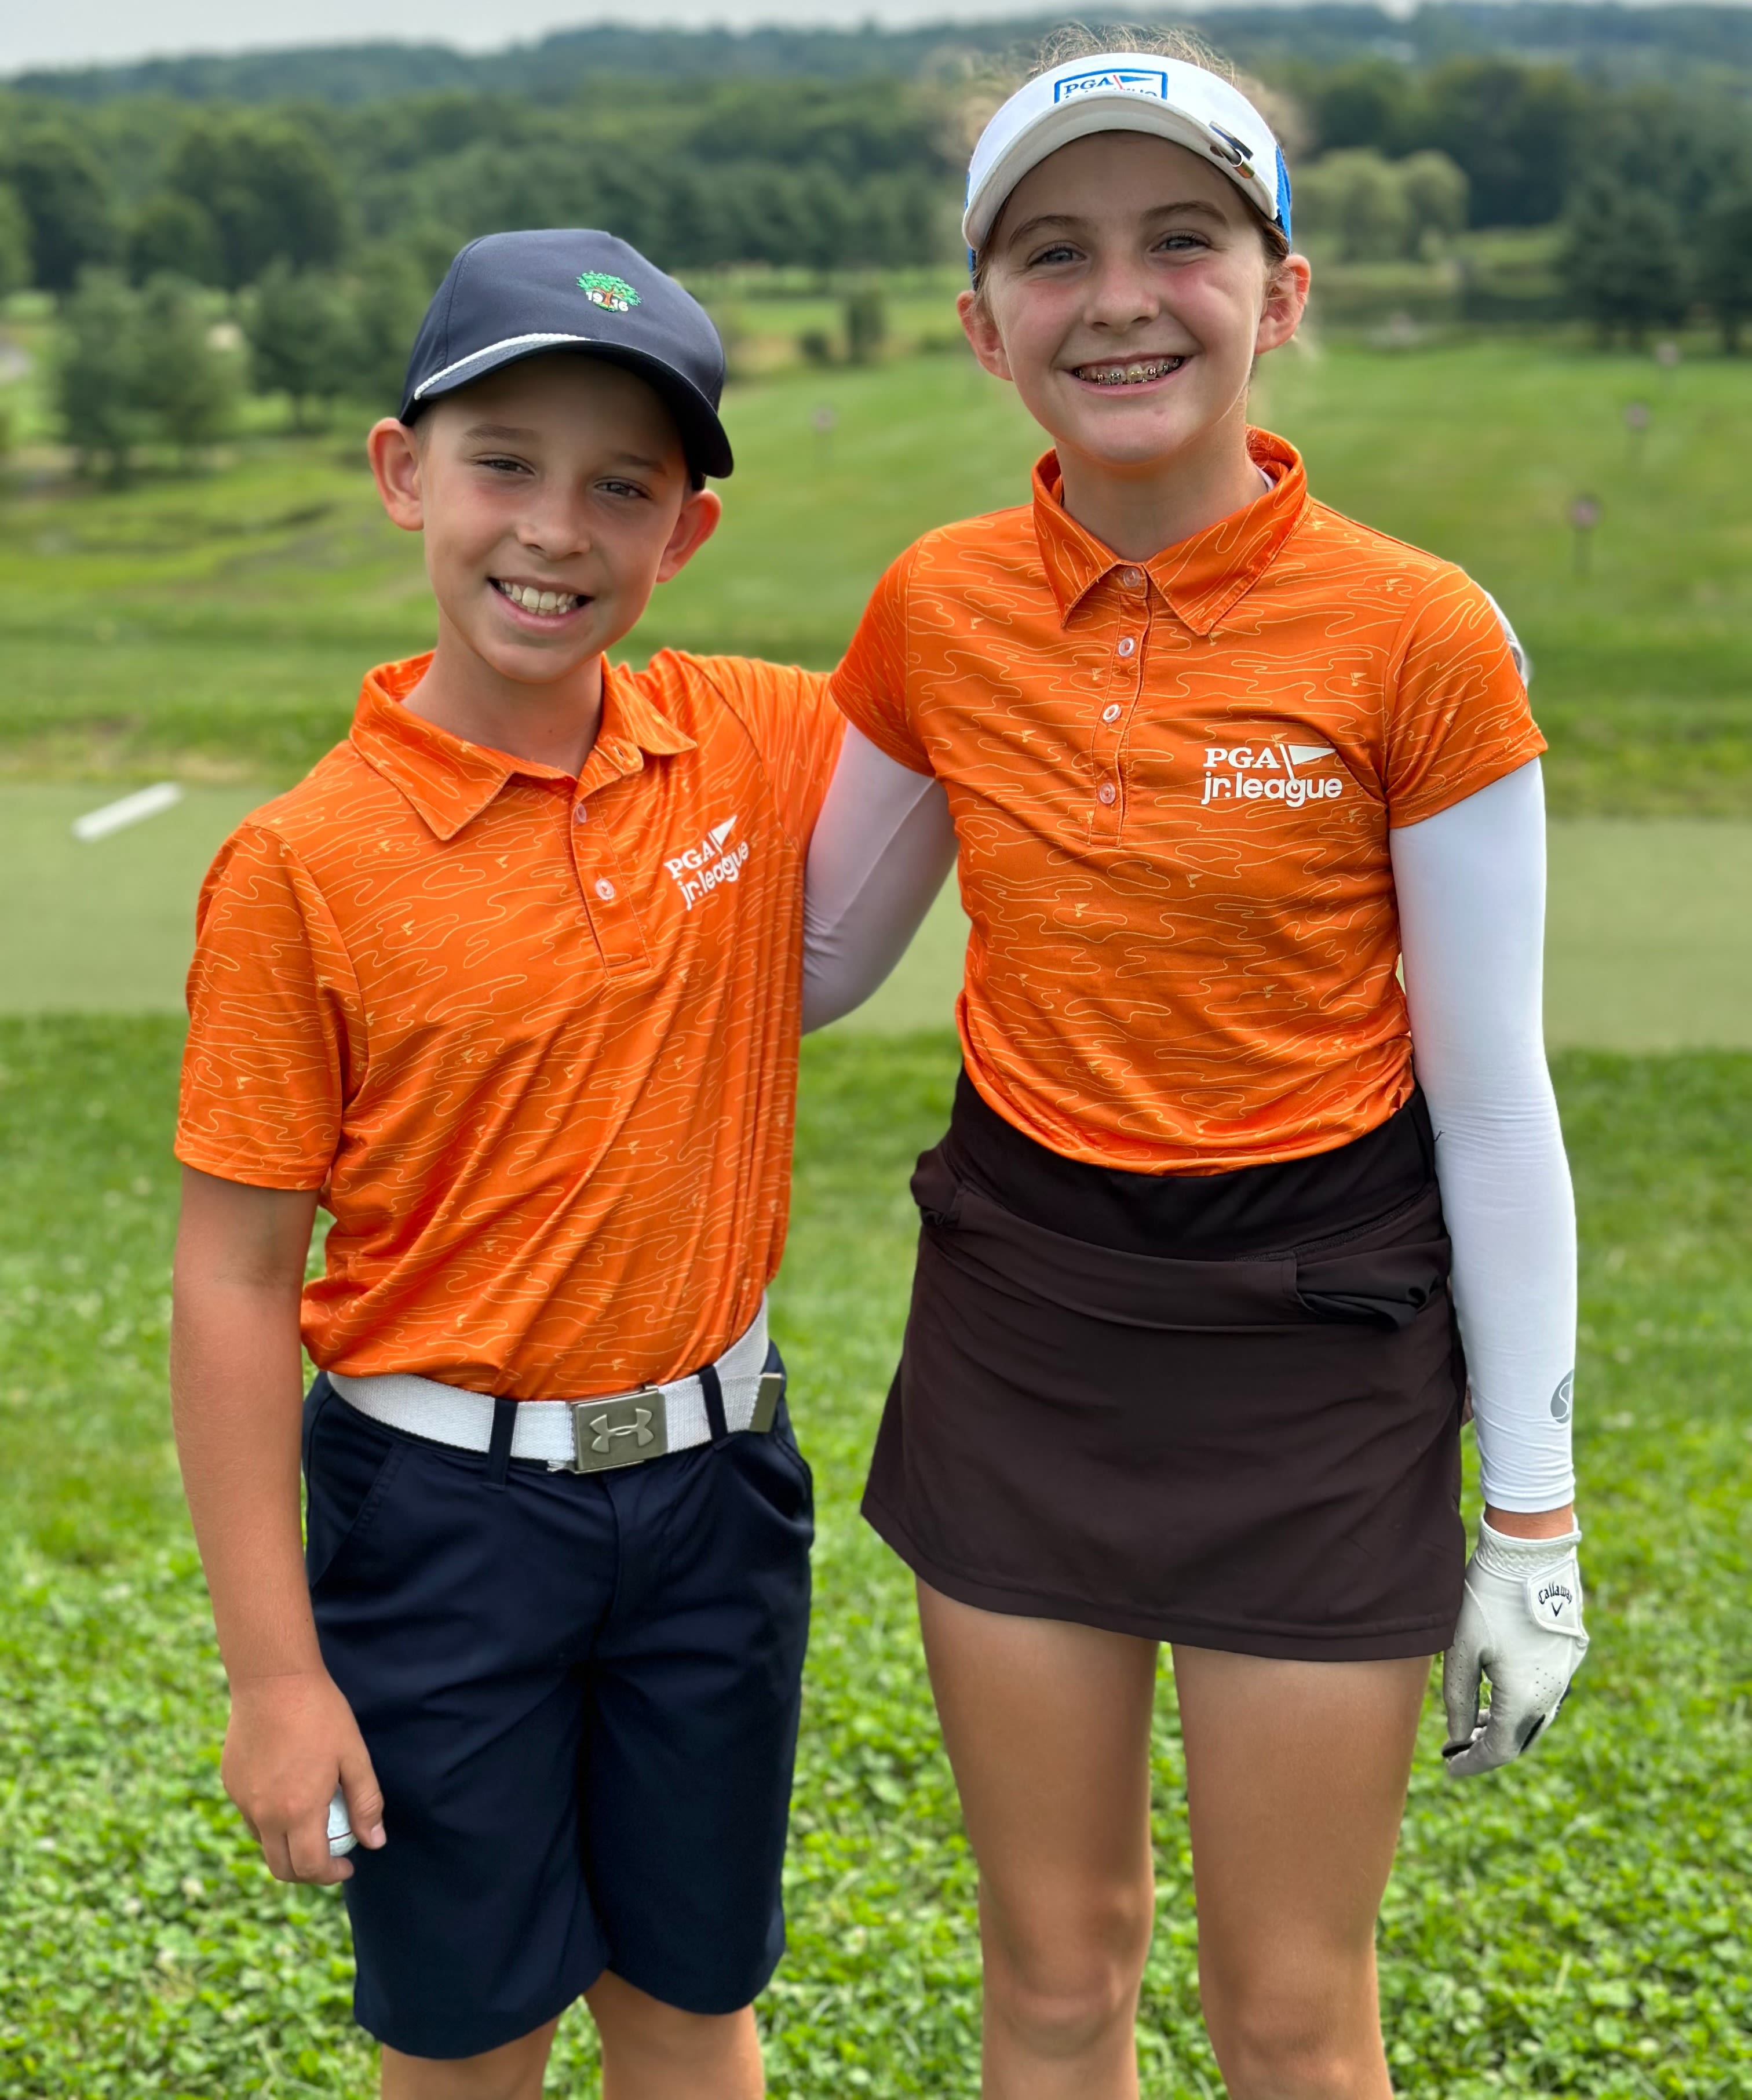 Ryley and her Team Connecticut partner, 10-year-old Reid Meyers.